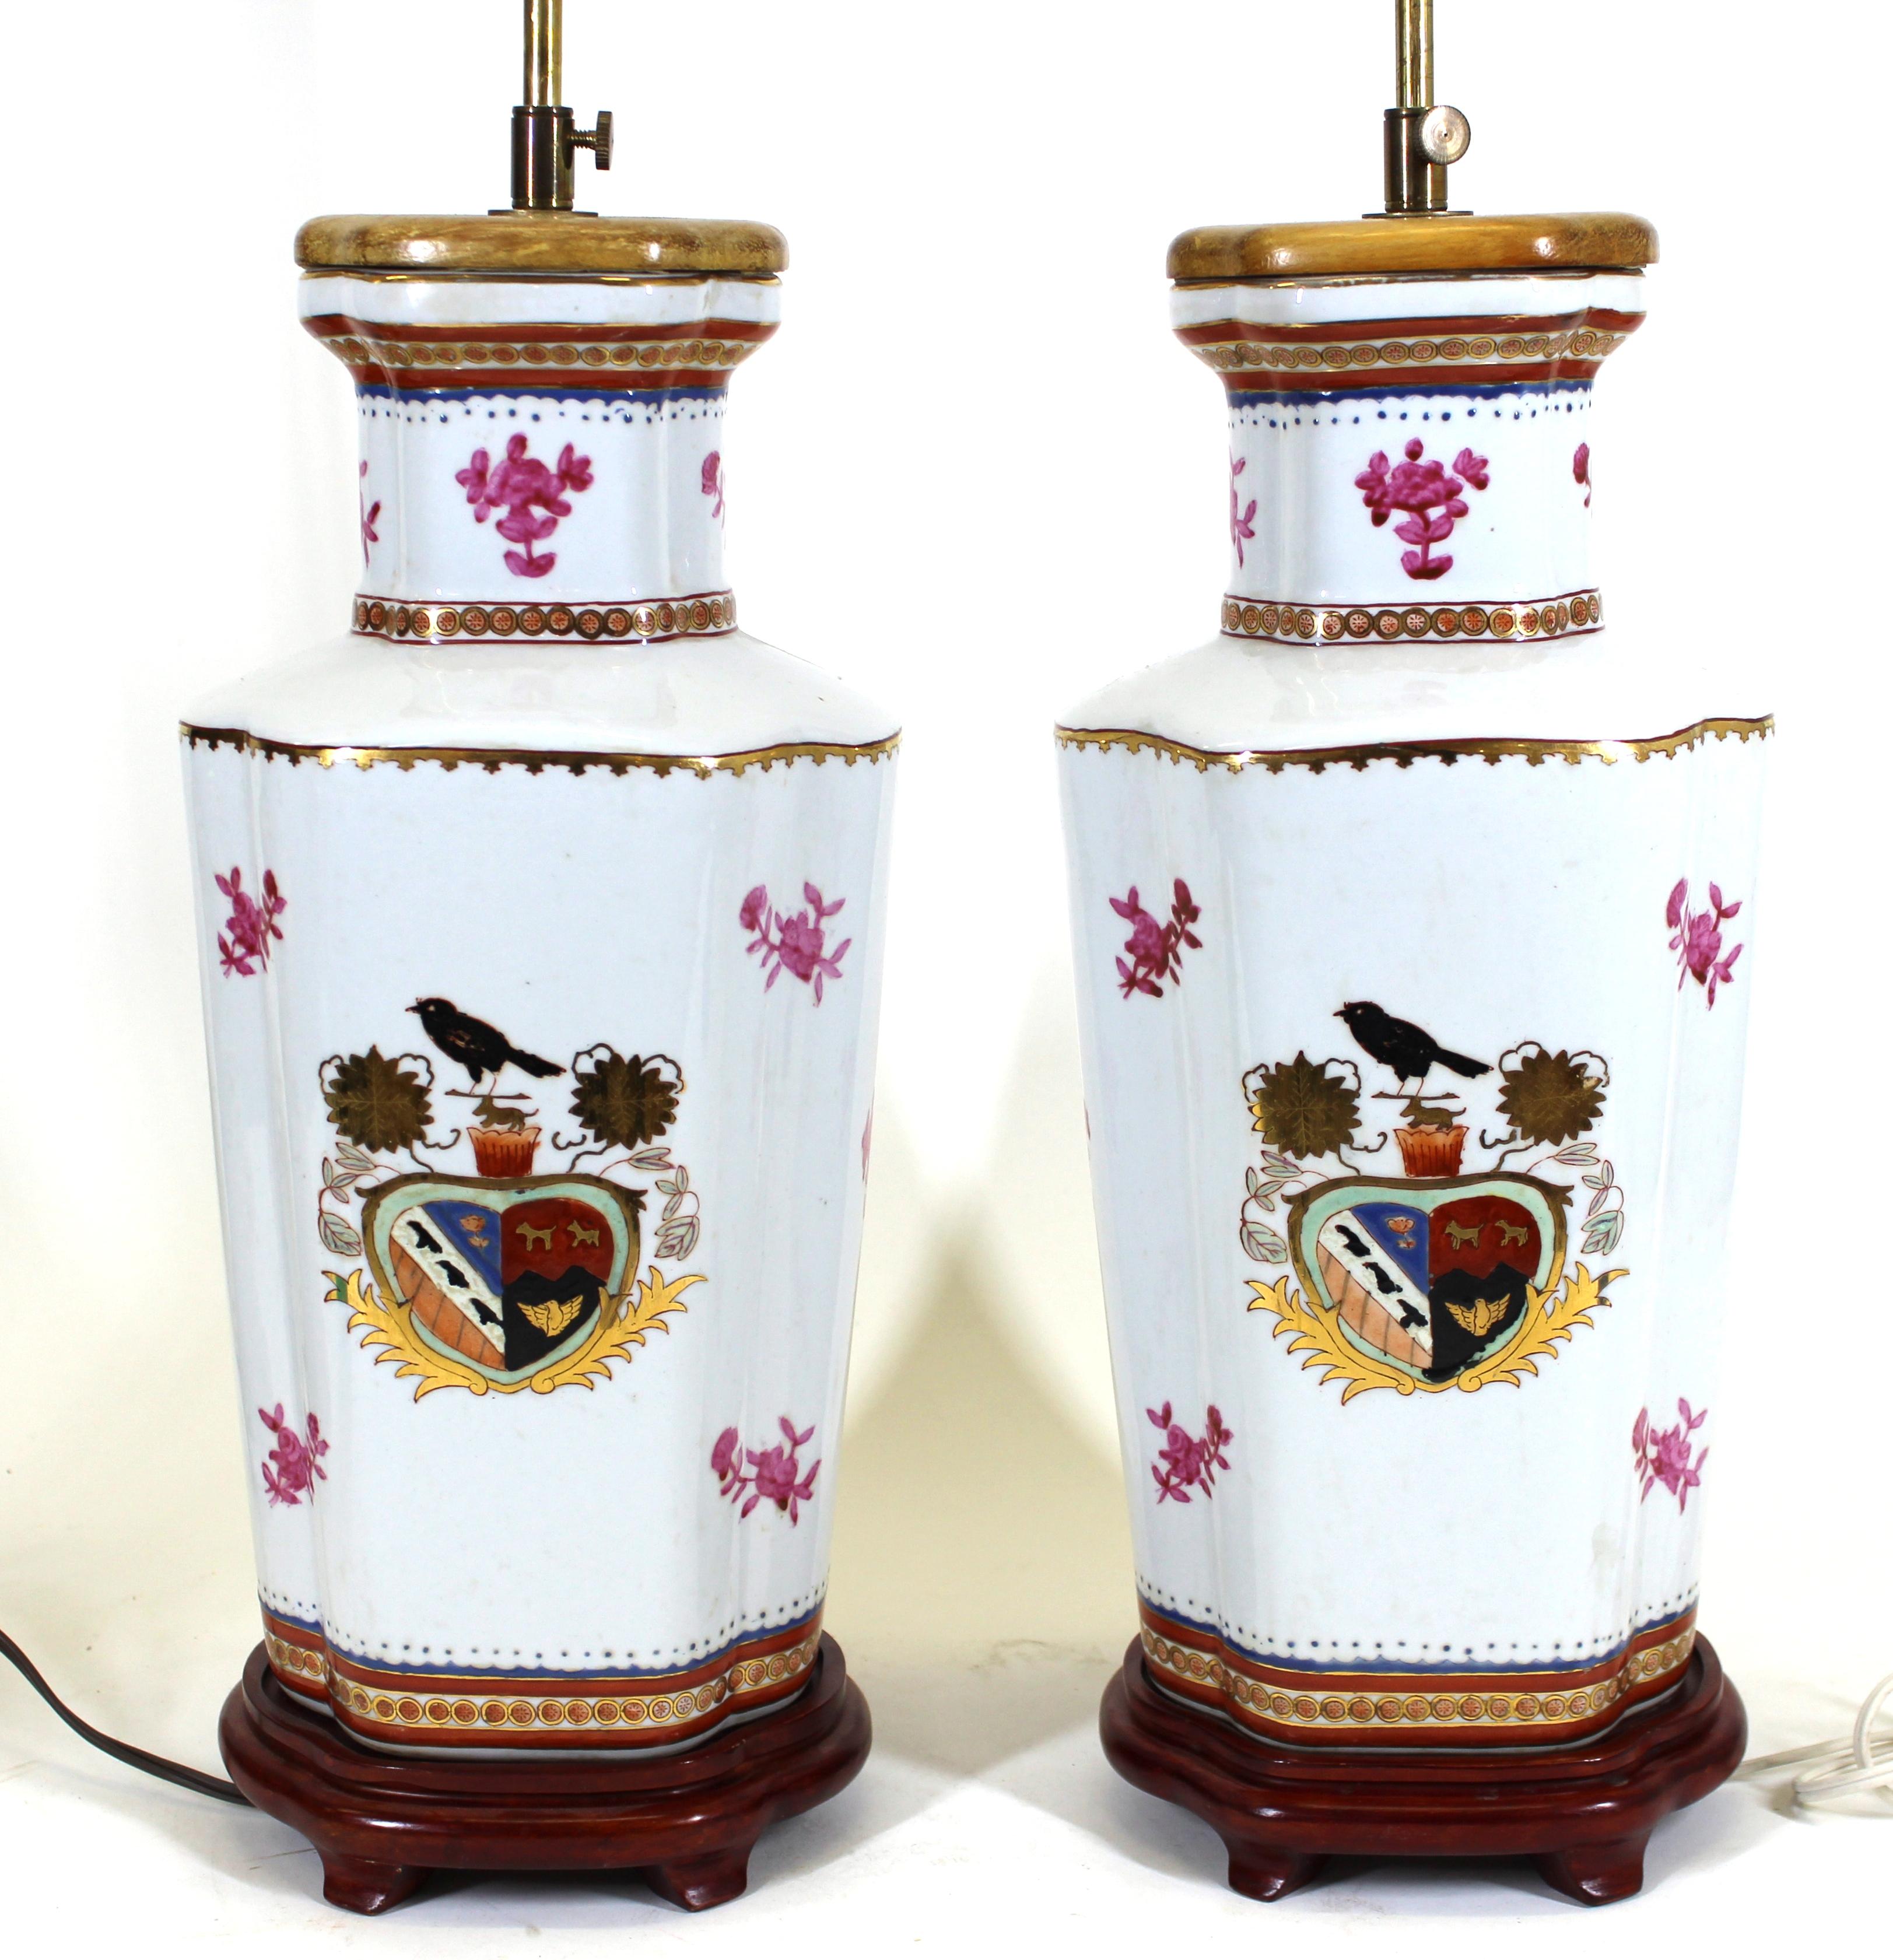 Chinese Export pair of armorial crest porcelain vases mounted as table lamps. In great vintage condition with age-appropriate wear.